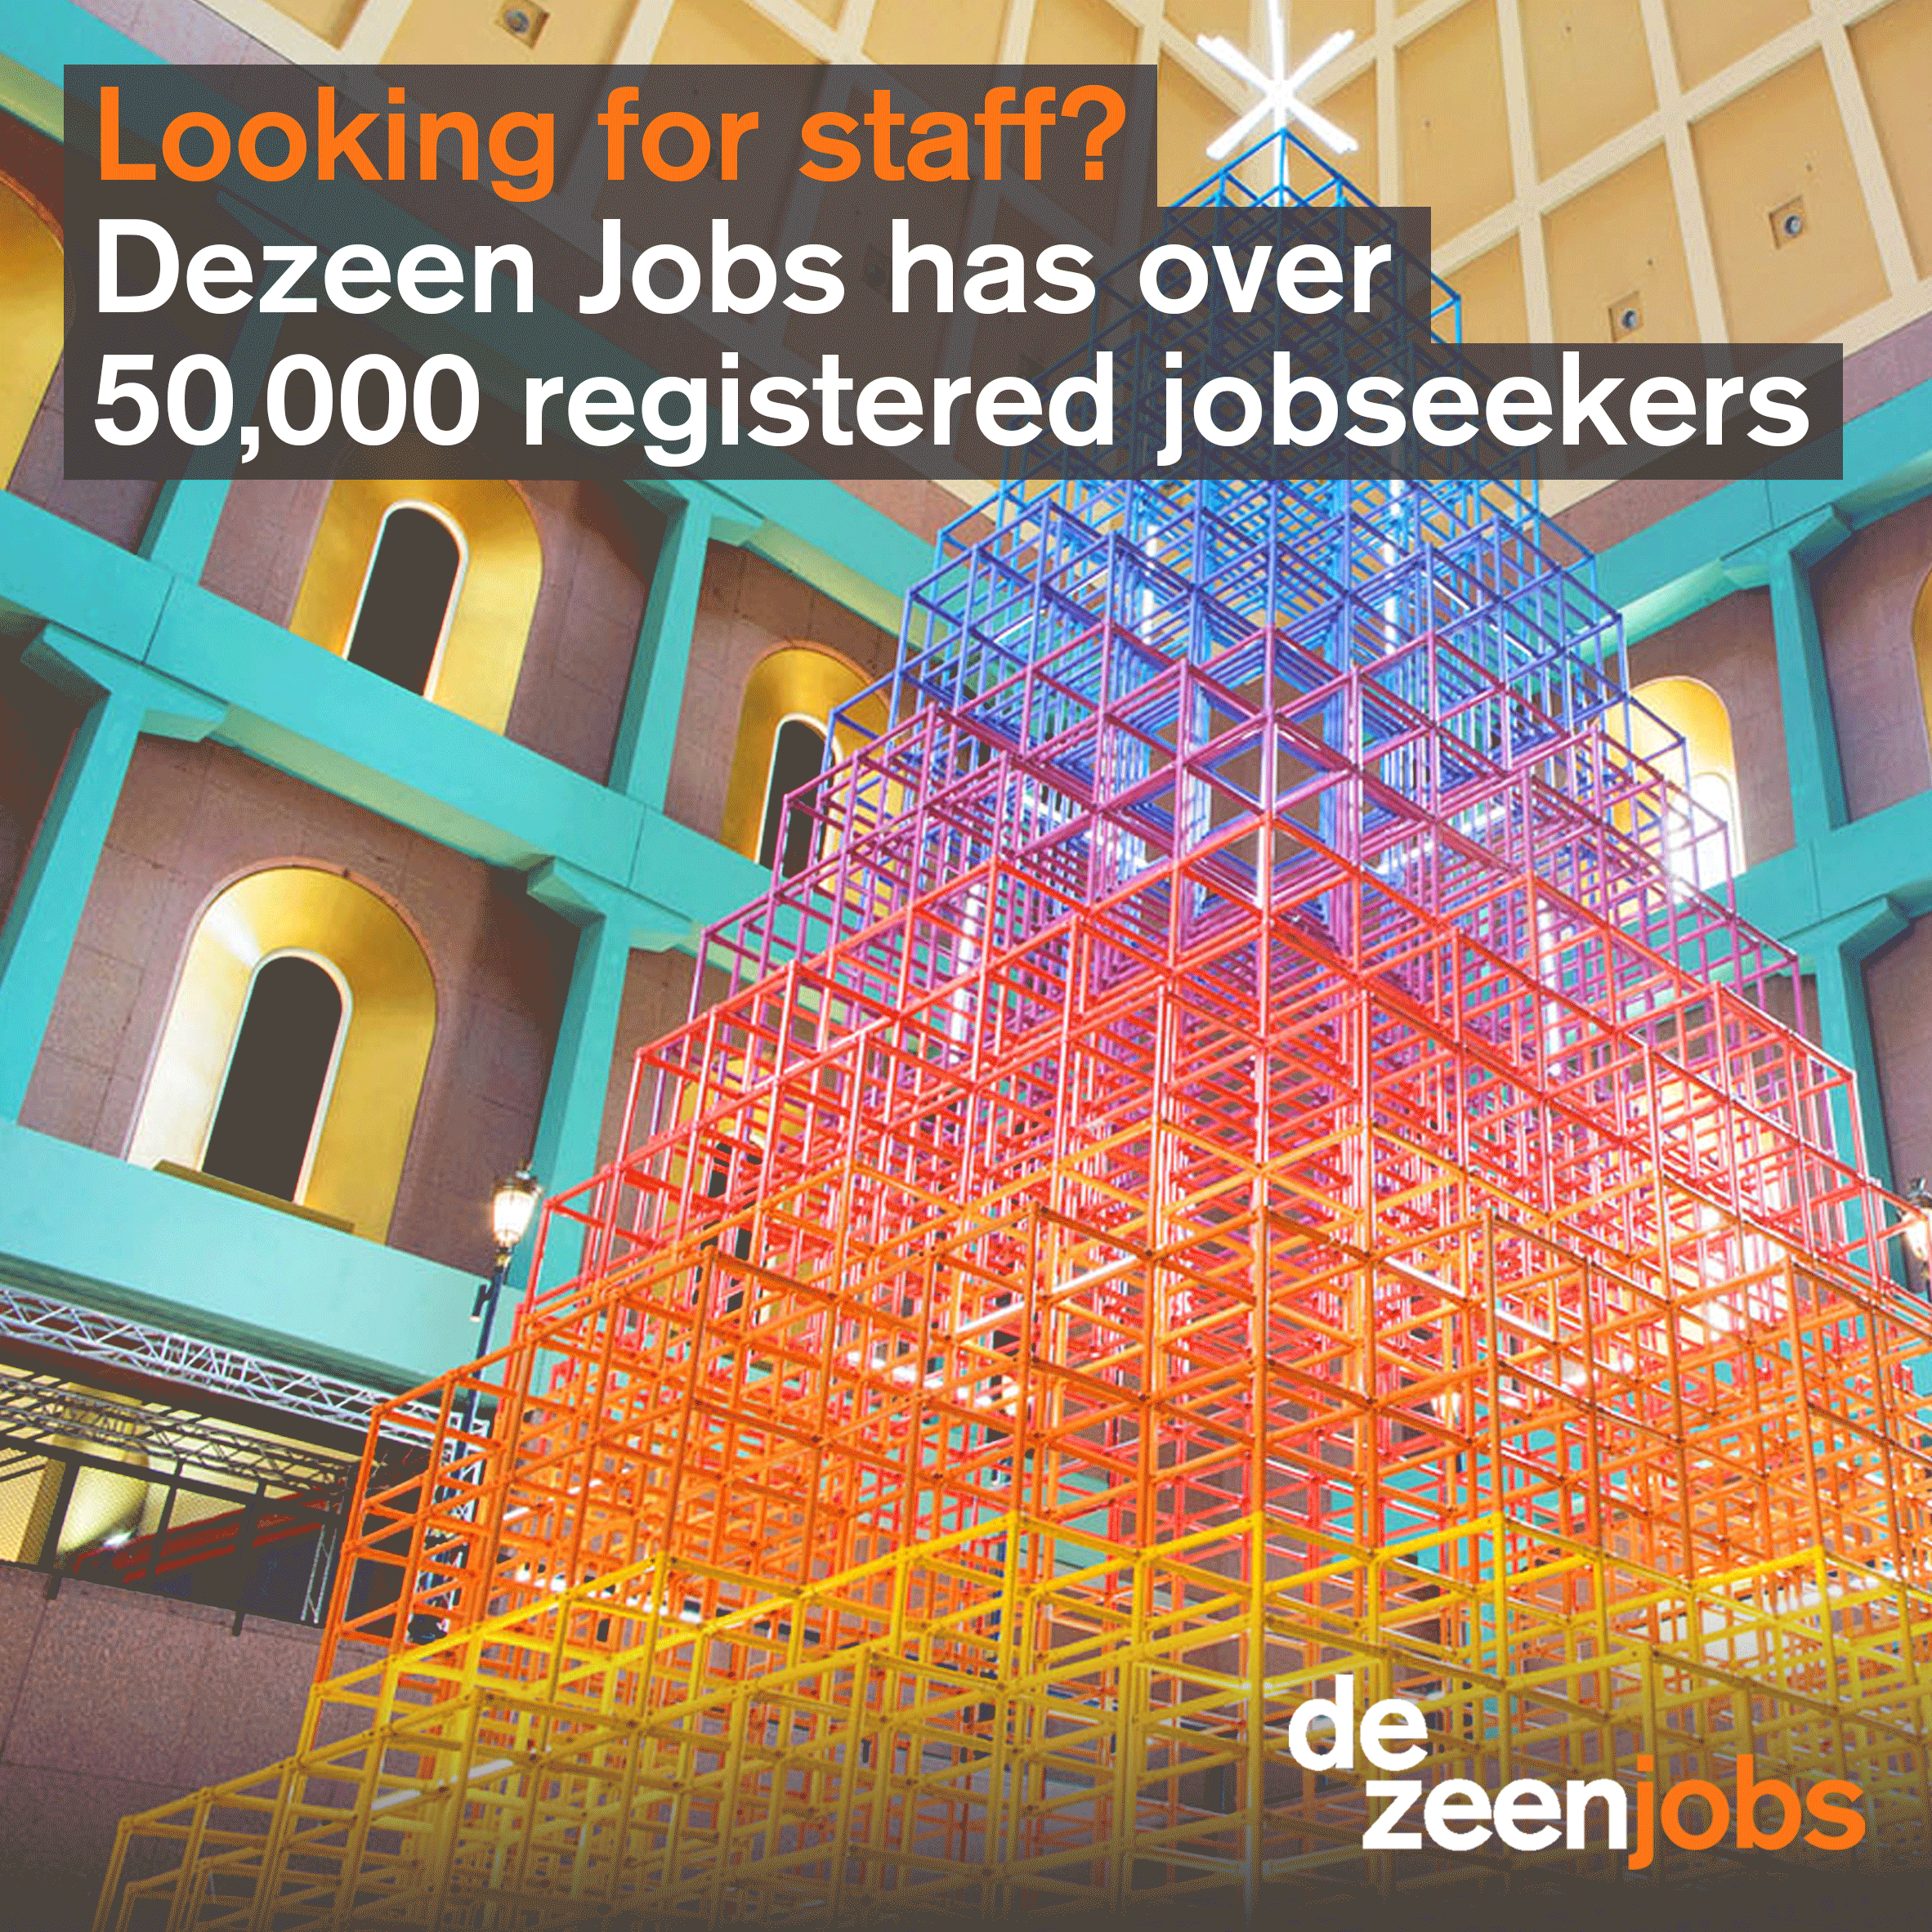 Buy a job ad and get 14 days free on Dezeen Jobs